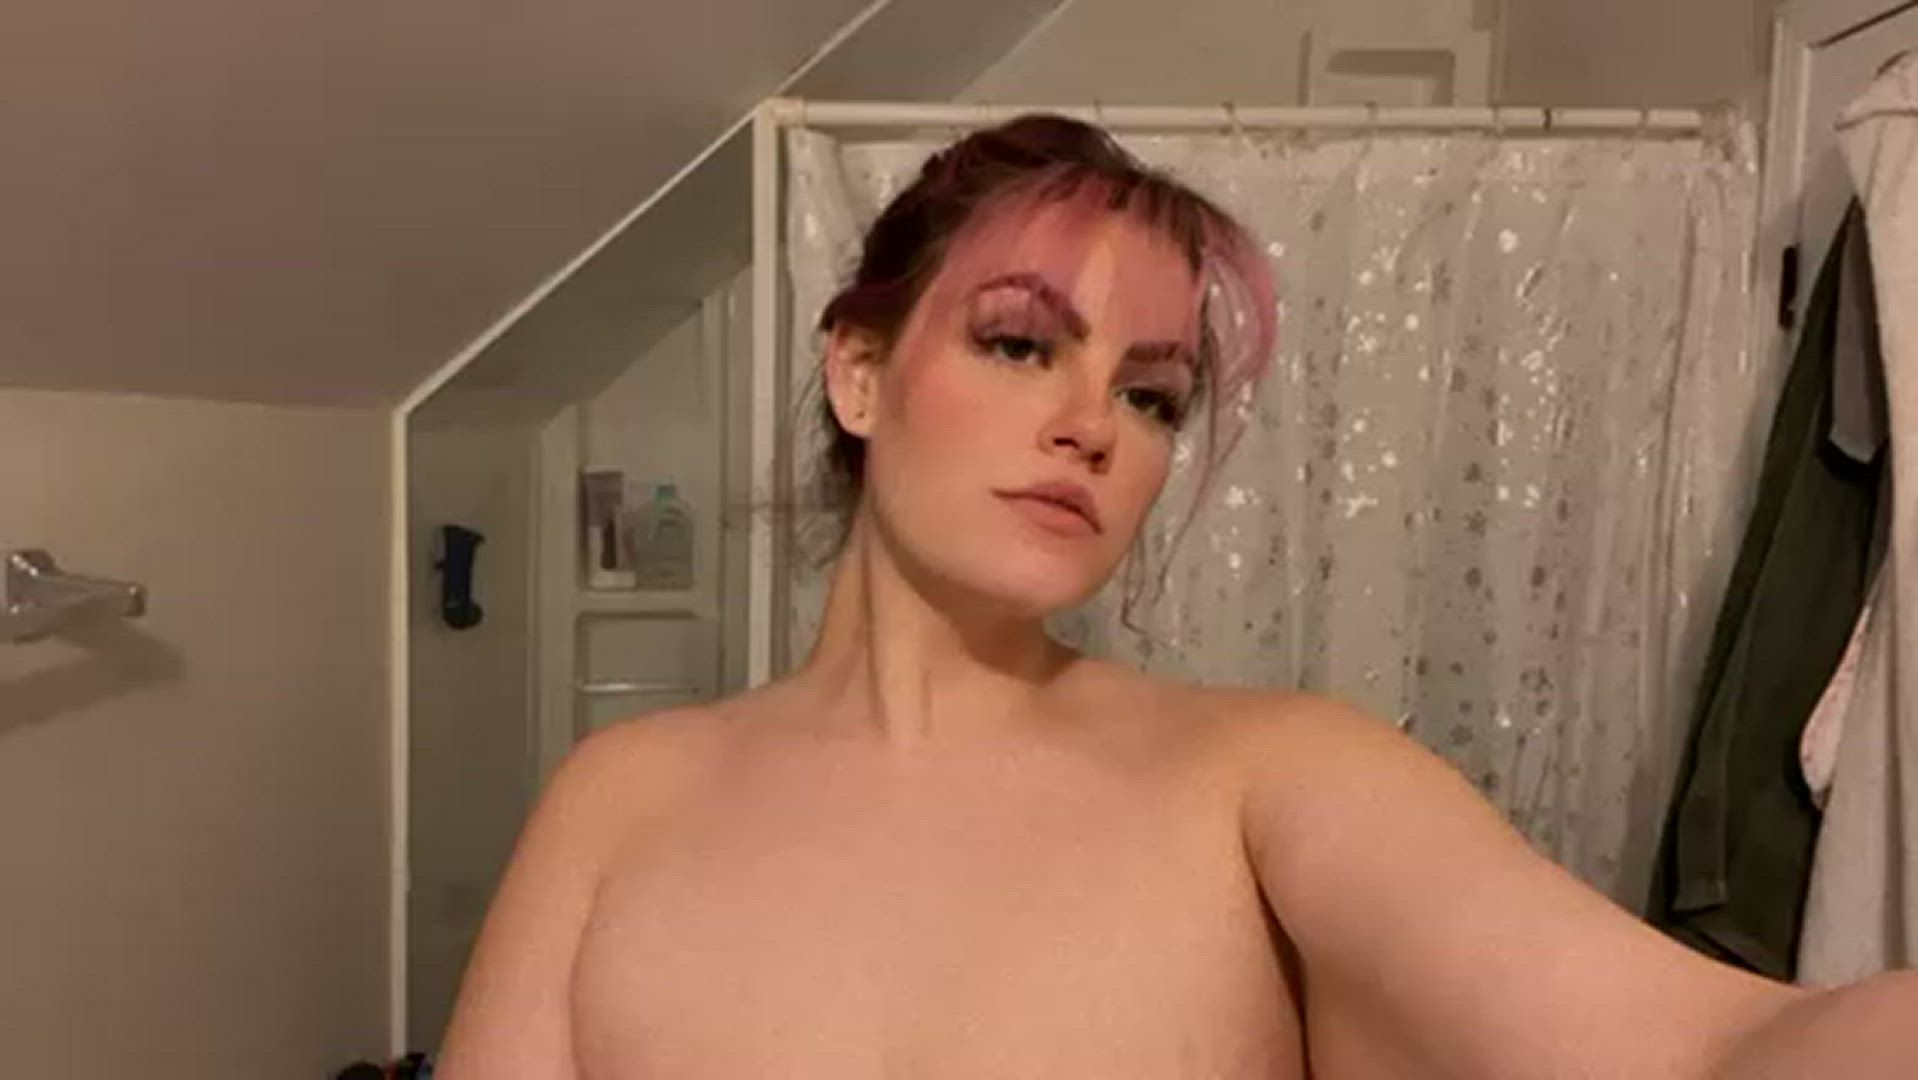 Amateur porn video with onlyfans model brittanyrae <strong>@brittanyraeof</strong>